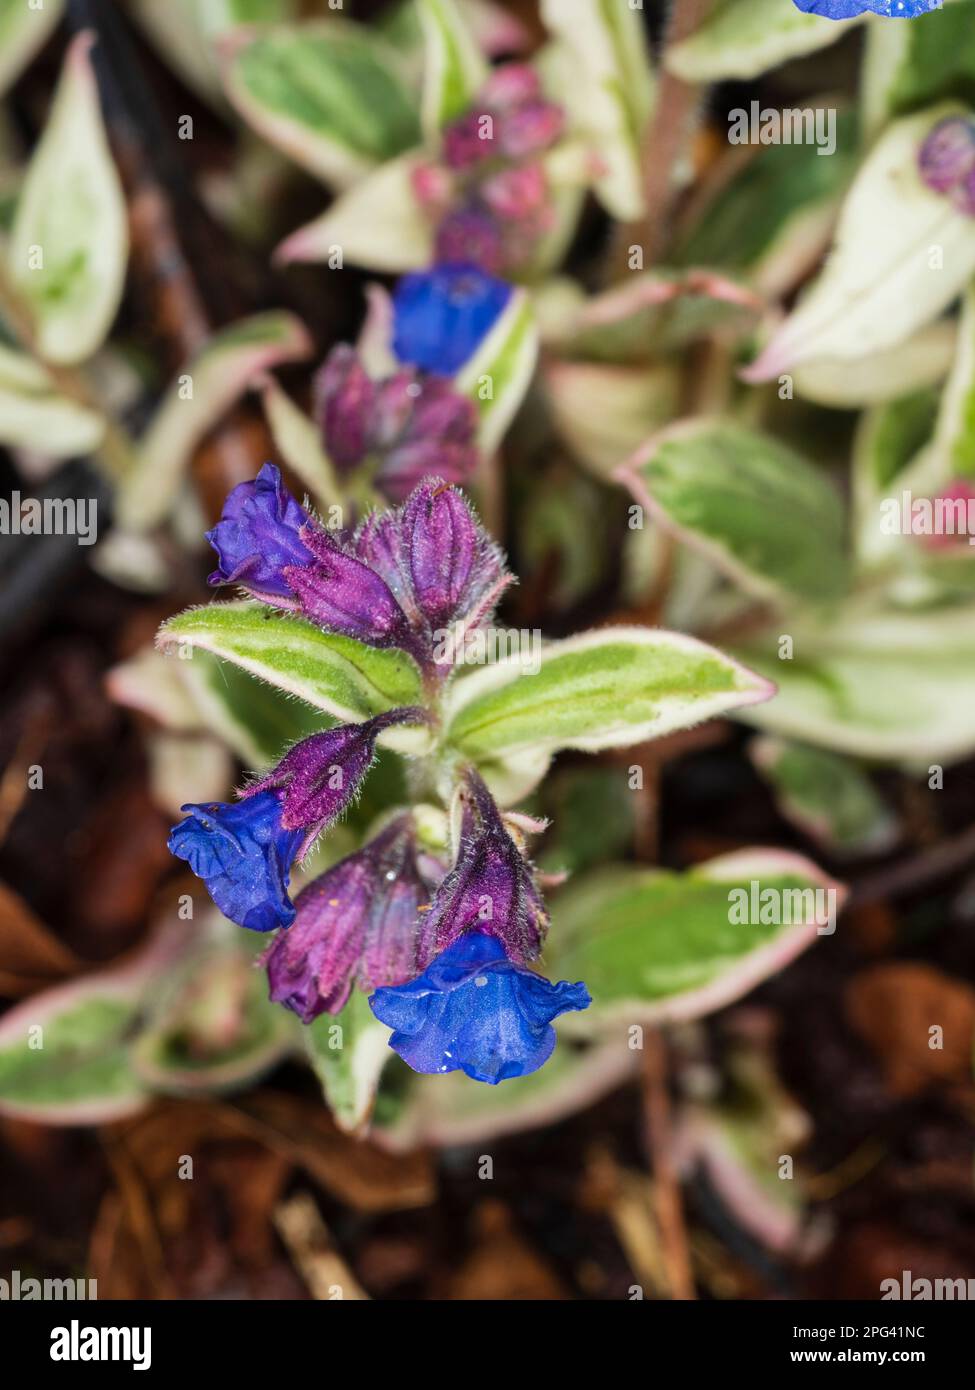 Blue, early spring flowers of the white variegated hardy perennial lungwort, Pulmonaria 'Open Skies' Stock Photo